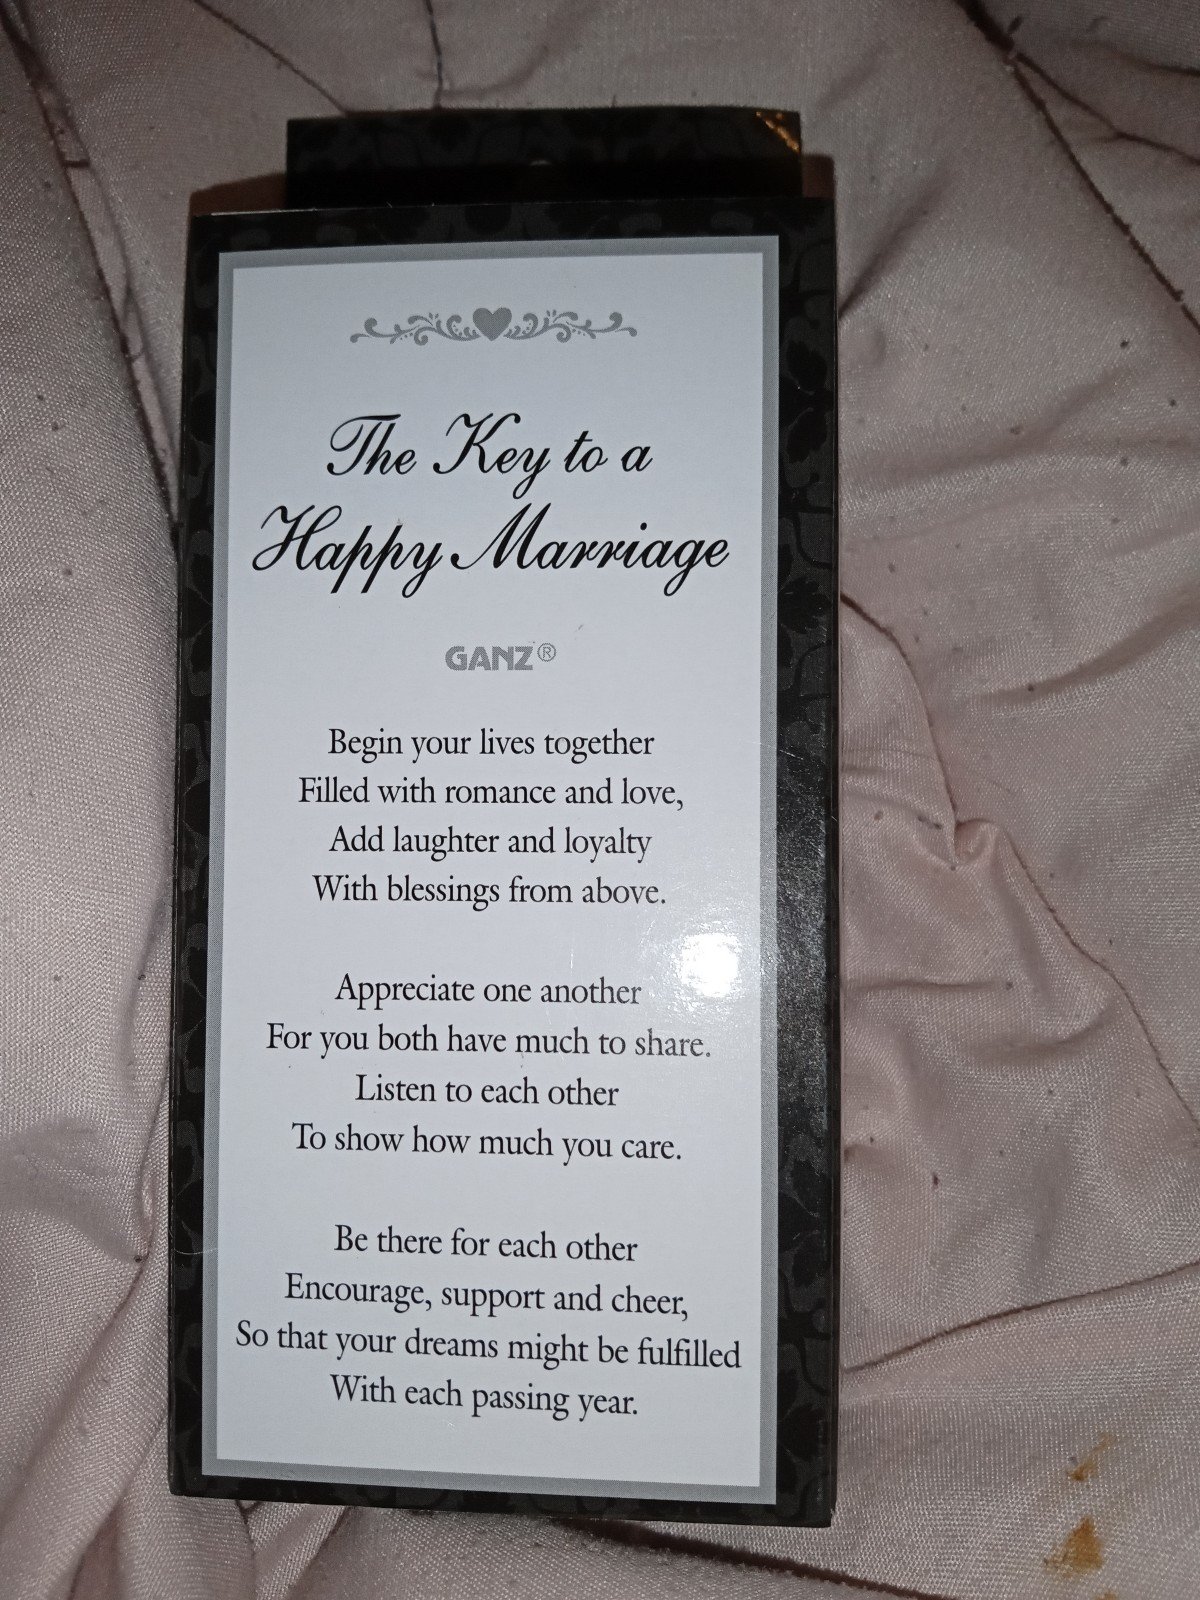 The key to a happy marriage dKHNNHphy